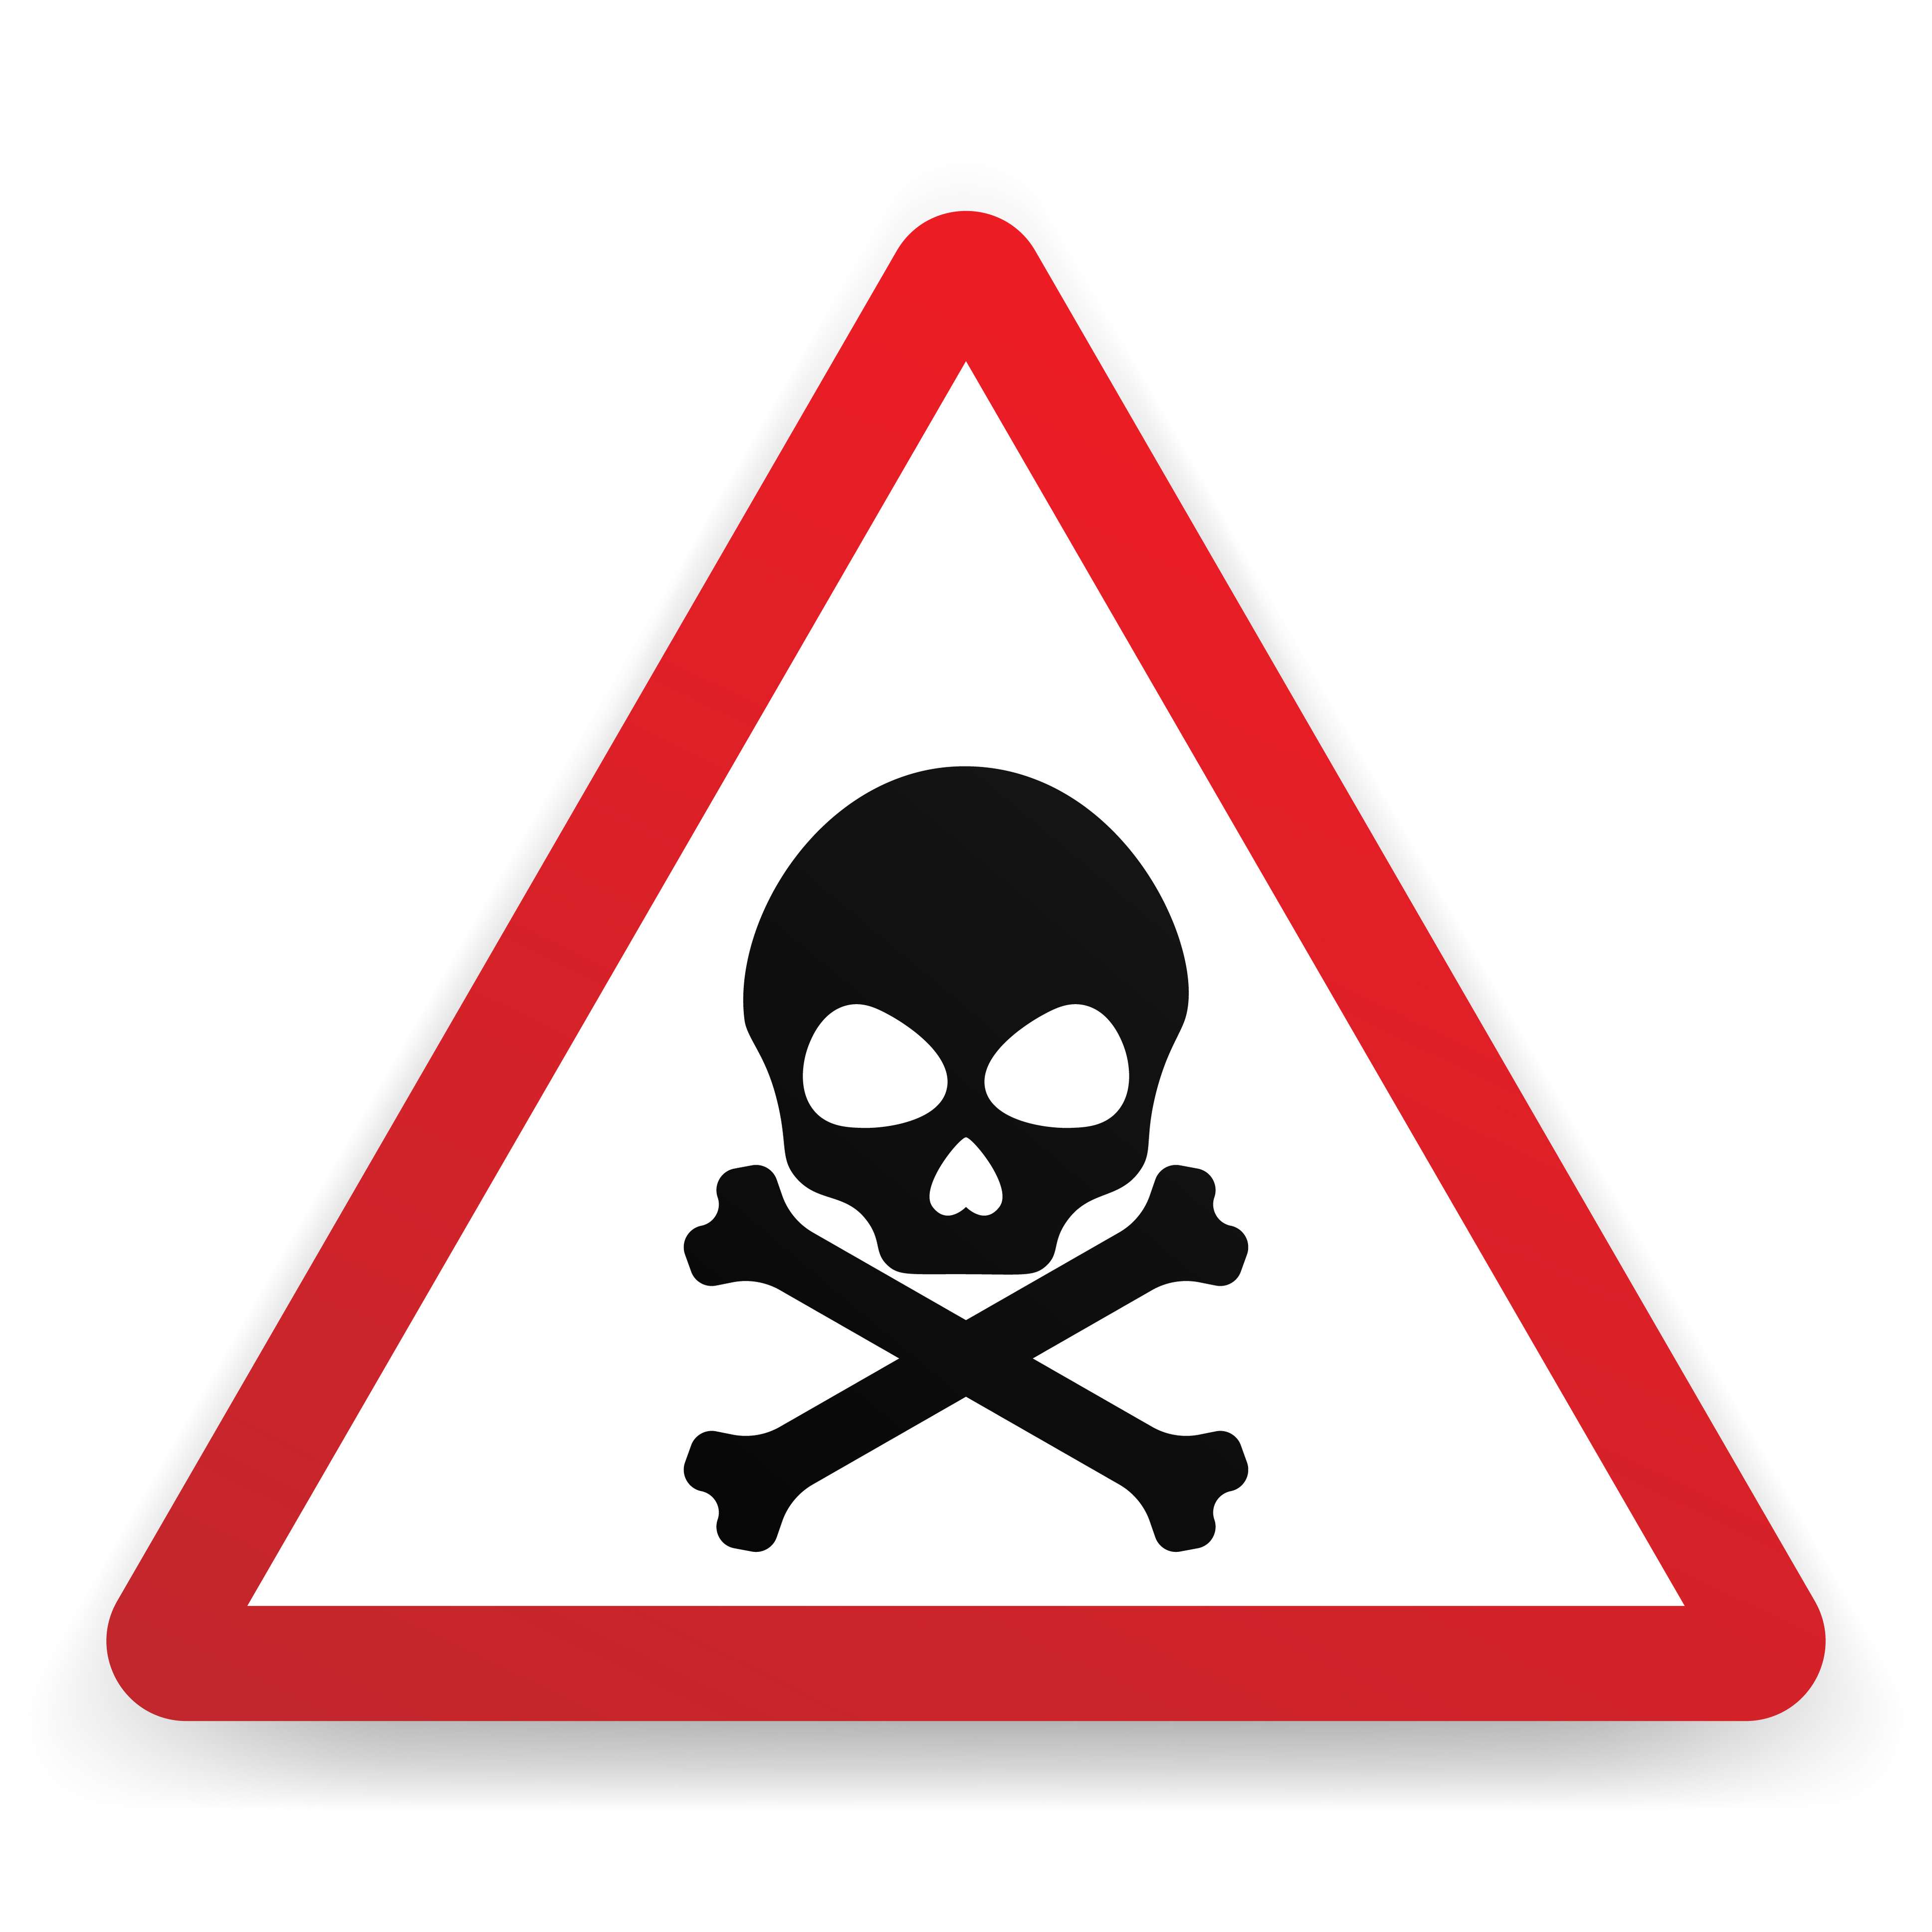 Poisonous for Dogs - a skull and crossbones sign in a red triangle